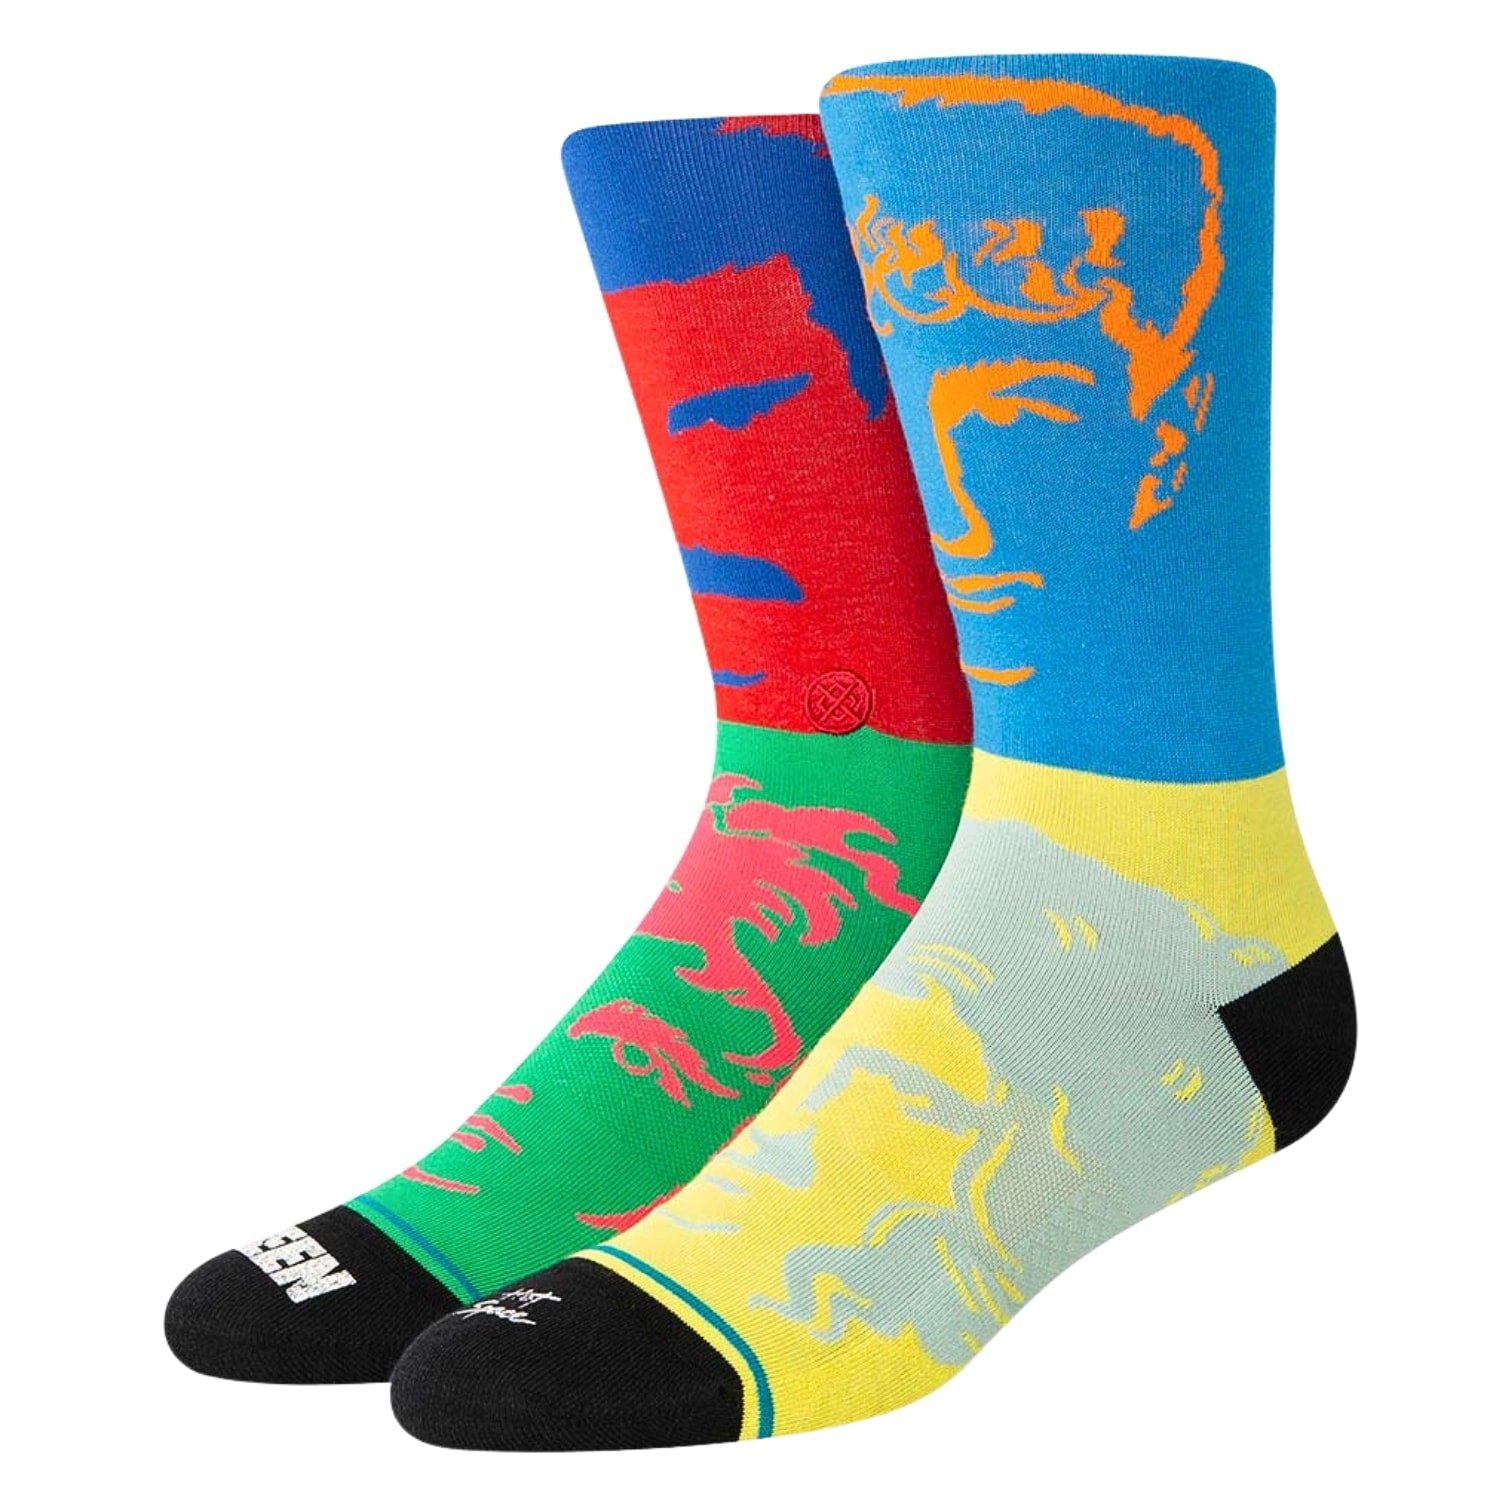 Stance X Queen Hot Space Socks - Multi - Unisex Crew Length Socks by Stance